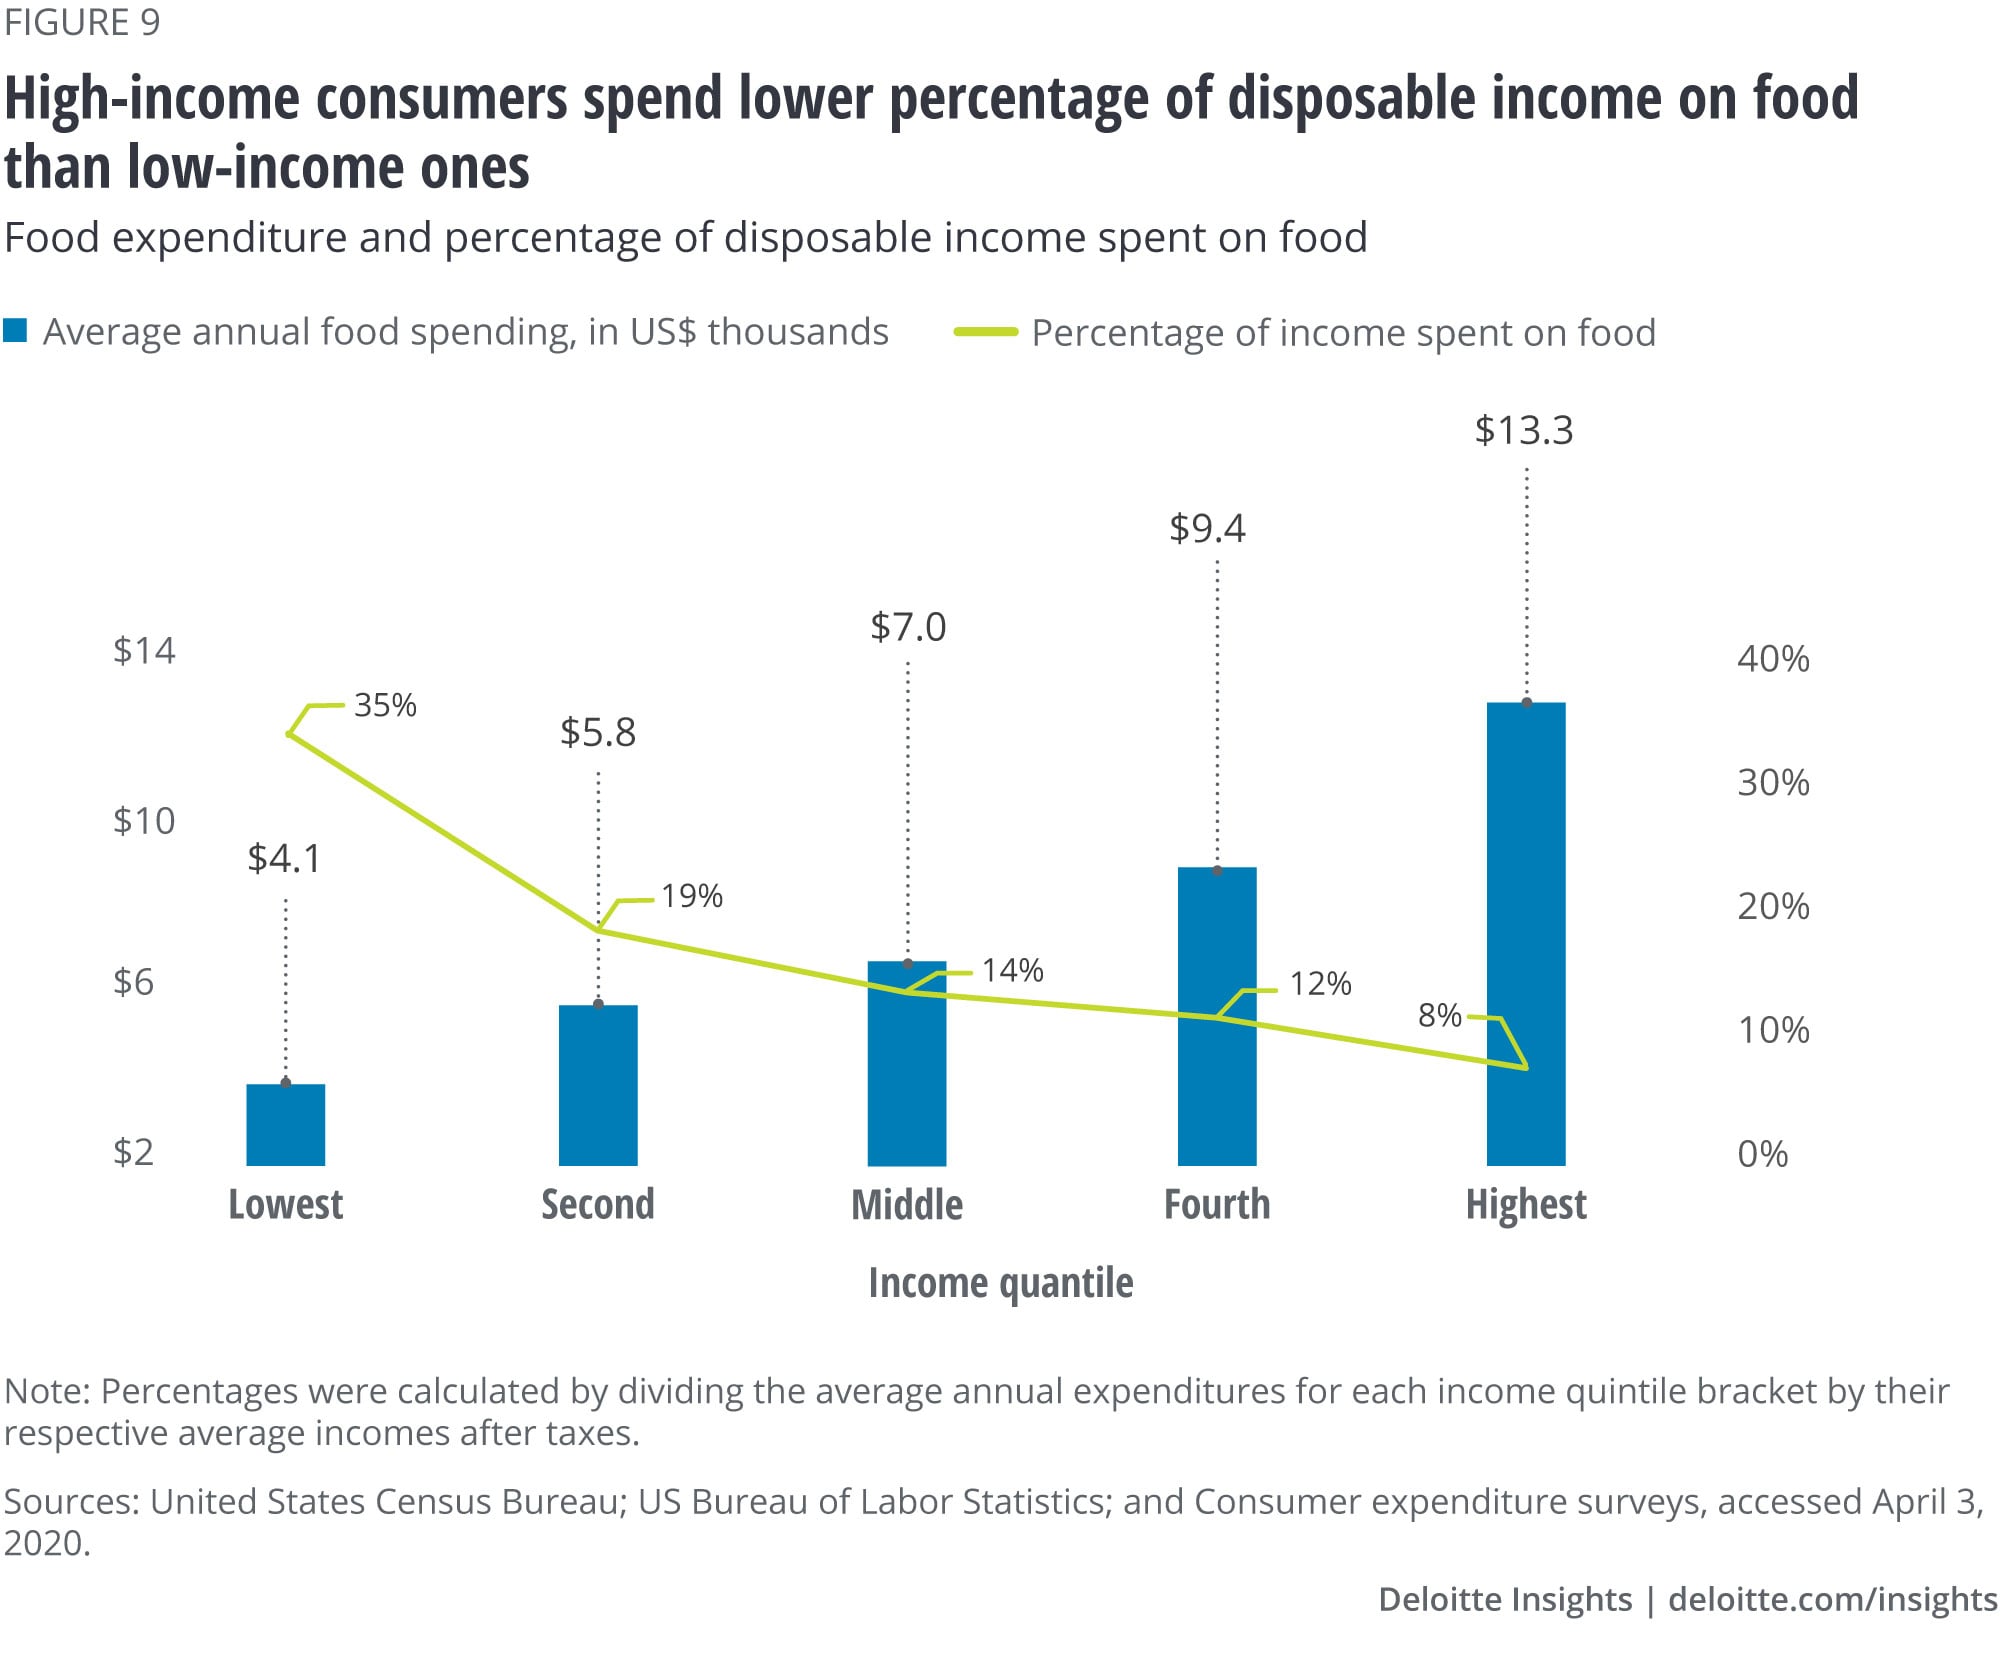 High-income consumers spend lower percentage of disposable income on food than low-income ones